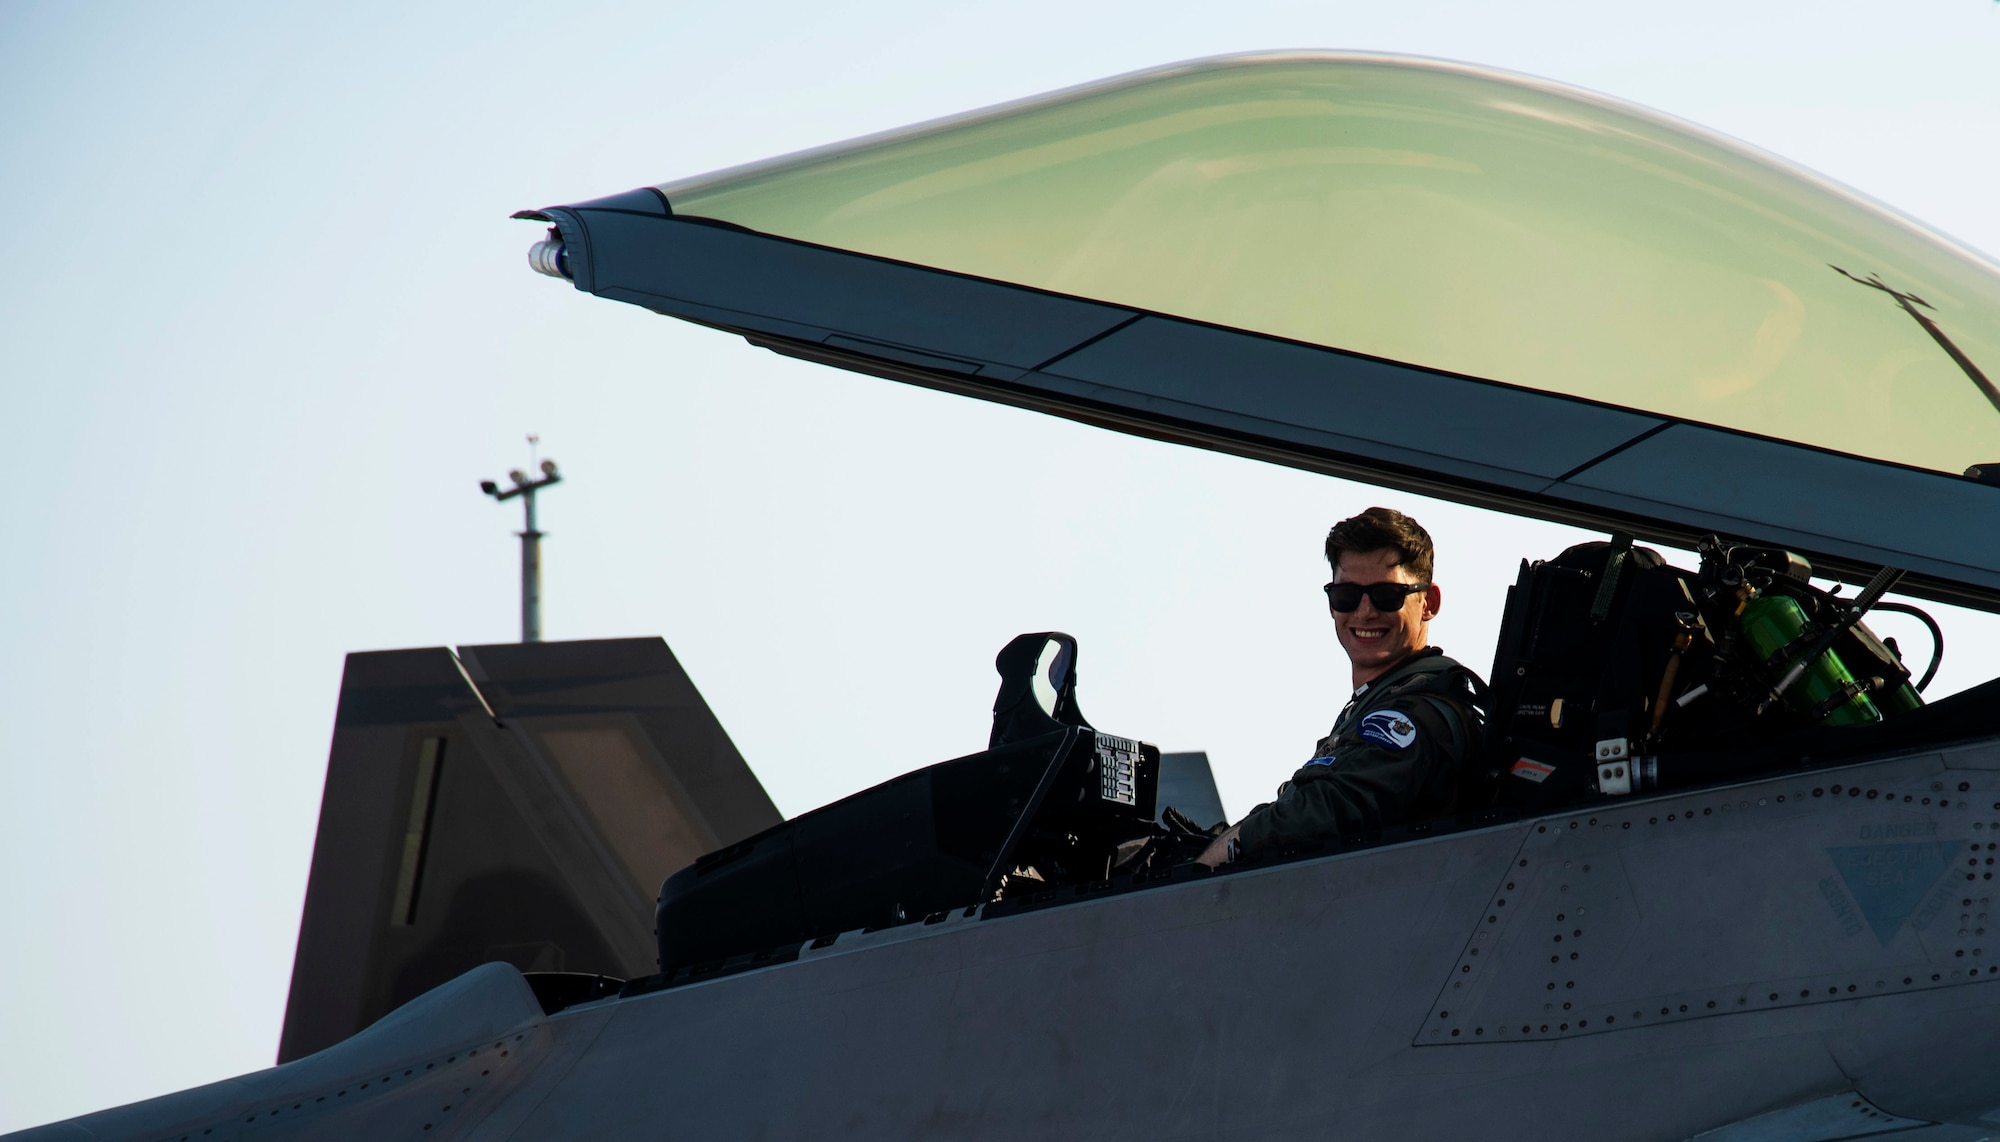 The pilot of an F-22 Raptor poses for a photo Nov. 6, 2019, at Tyndall Air Force Base, Florida. The pilot, airframe, and maintenance team supported Checkered Flag 20-1, which is a large-scale aerial exercise designed to integrate fourth and fifth-generation airframes to enhance mobility, deployment, and employment capabilities of aviators and maintainers. The exercise involved airpower assets, more than 50 aircraft, and support personnel from multiple installations. Aircraft and pilots participated in a Weapons System Evaluation Program and are evaluated on air-to-air and air-to-ground operations, providing a unique training environment. (U.S. Air Force photo by Staff Sgt. Magen M. Reeves)